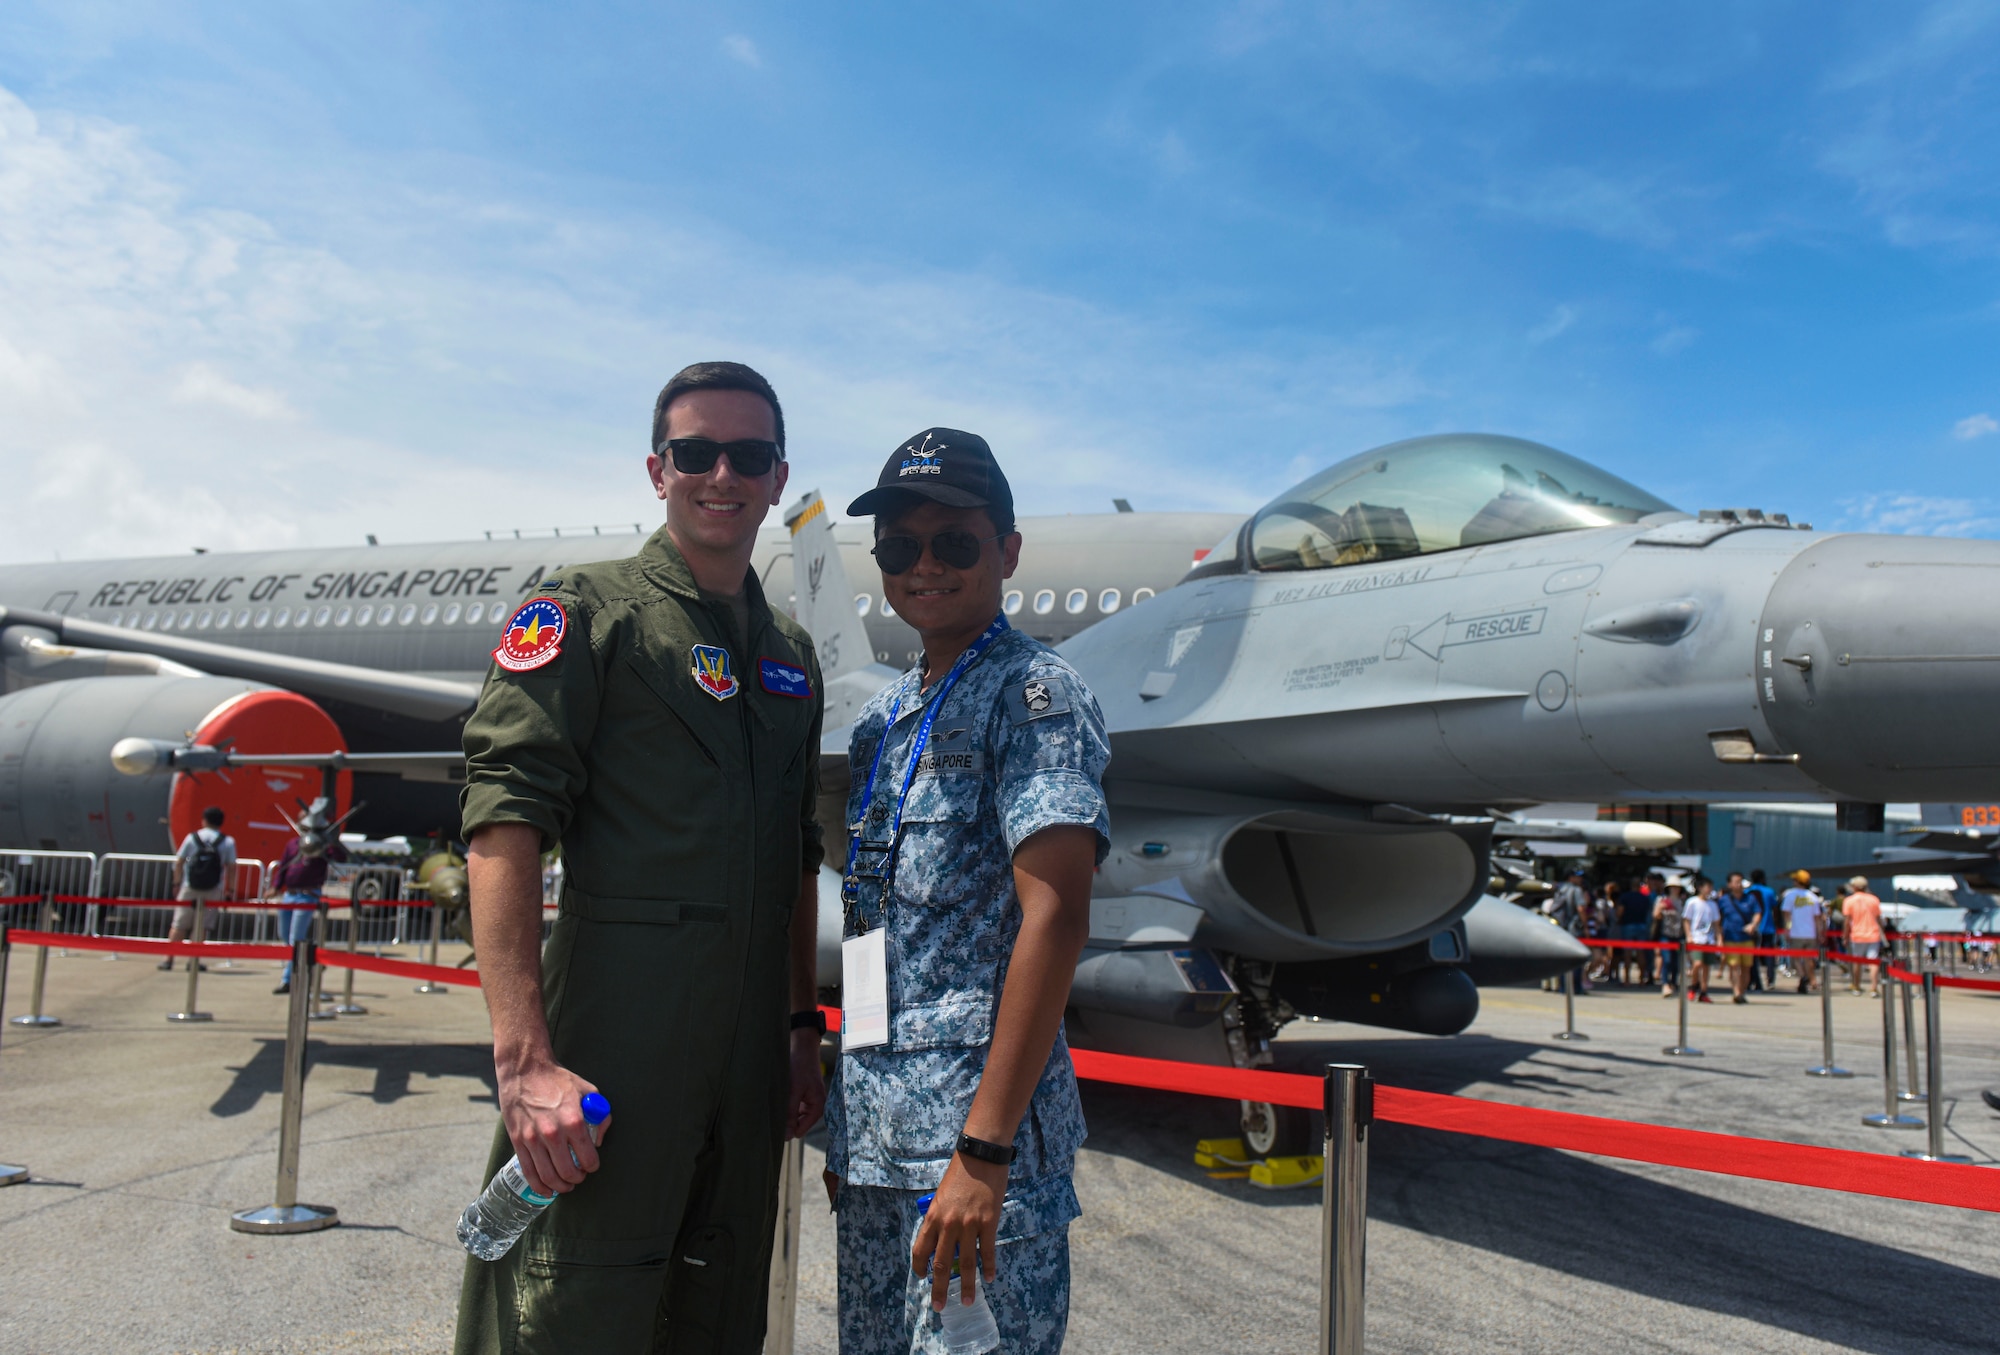 U.S. and Singapore Air Force member stand side by side smiling.